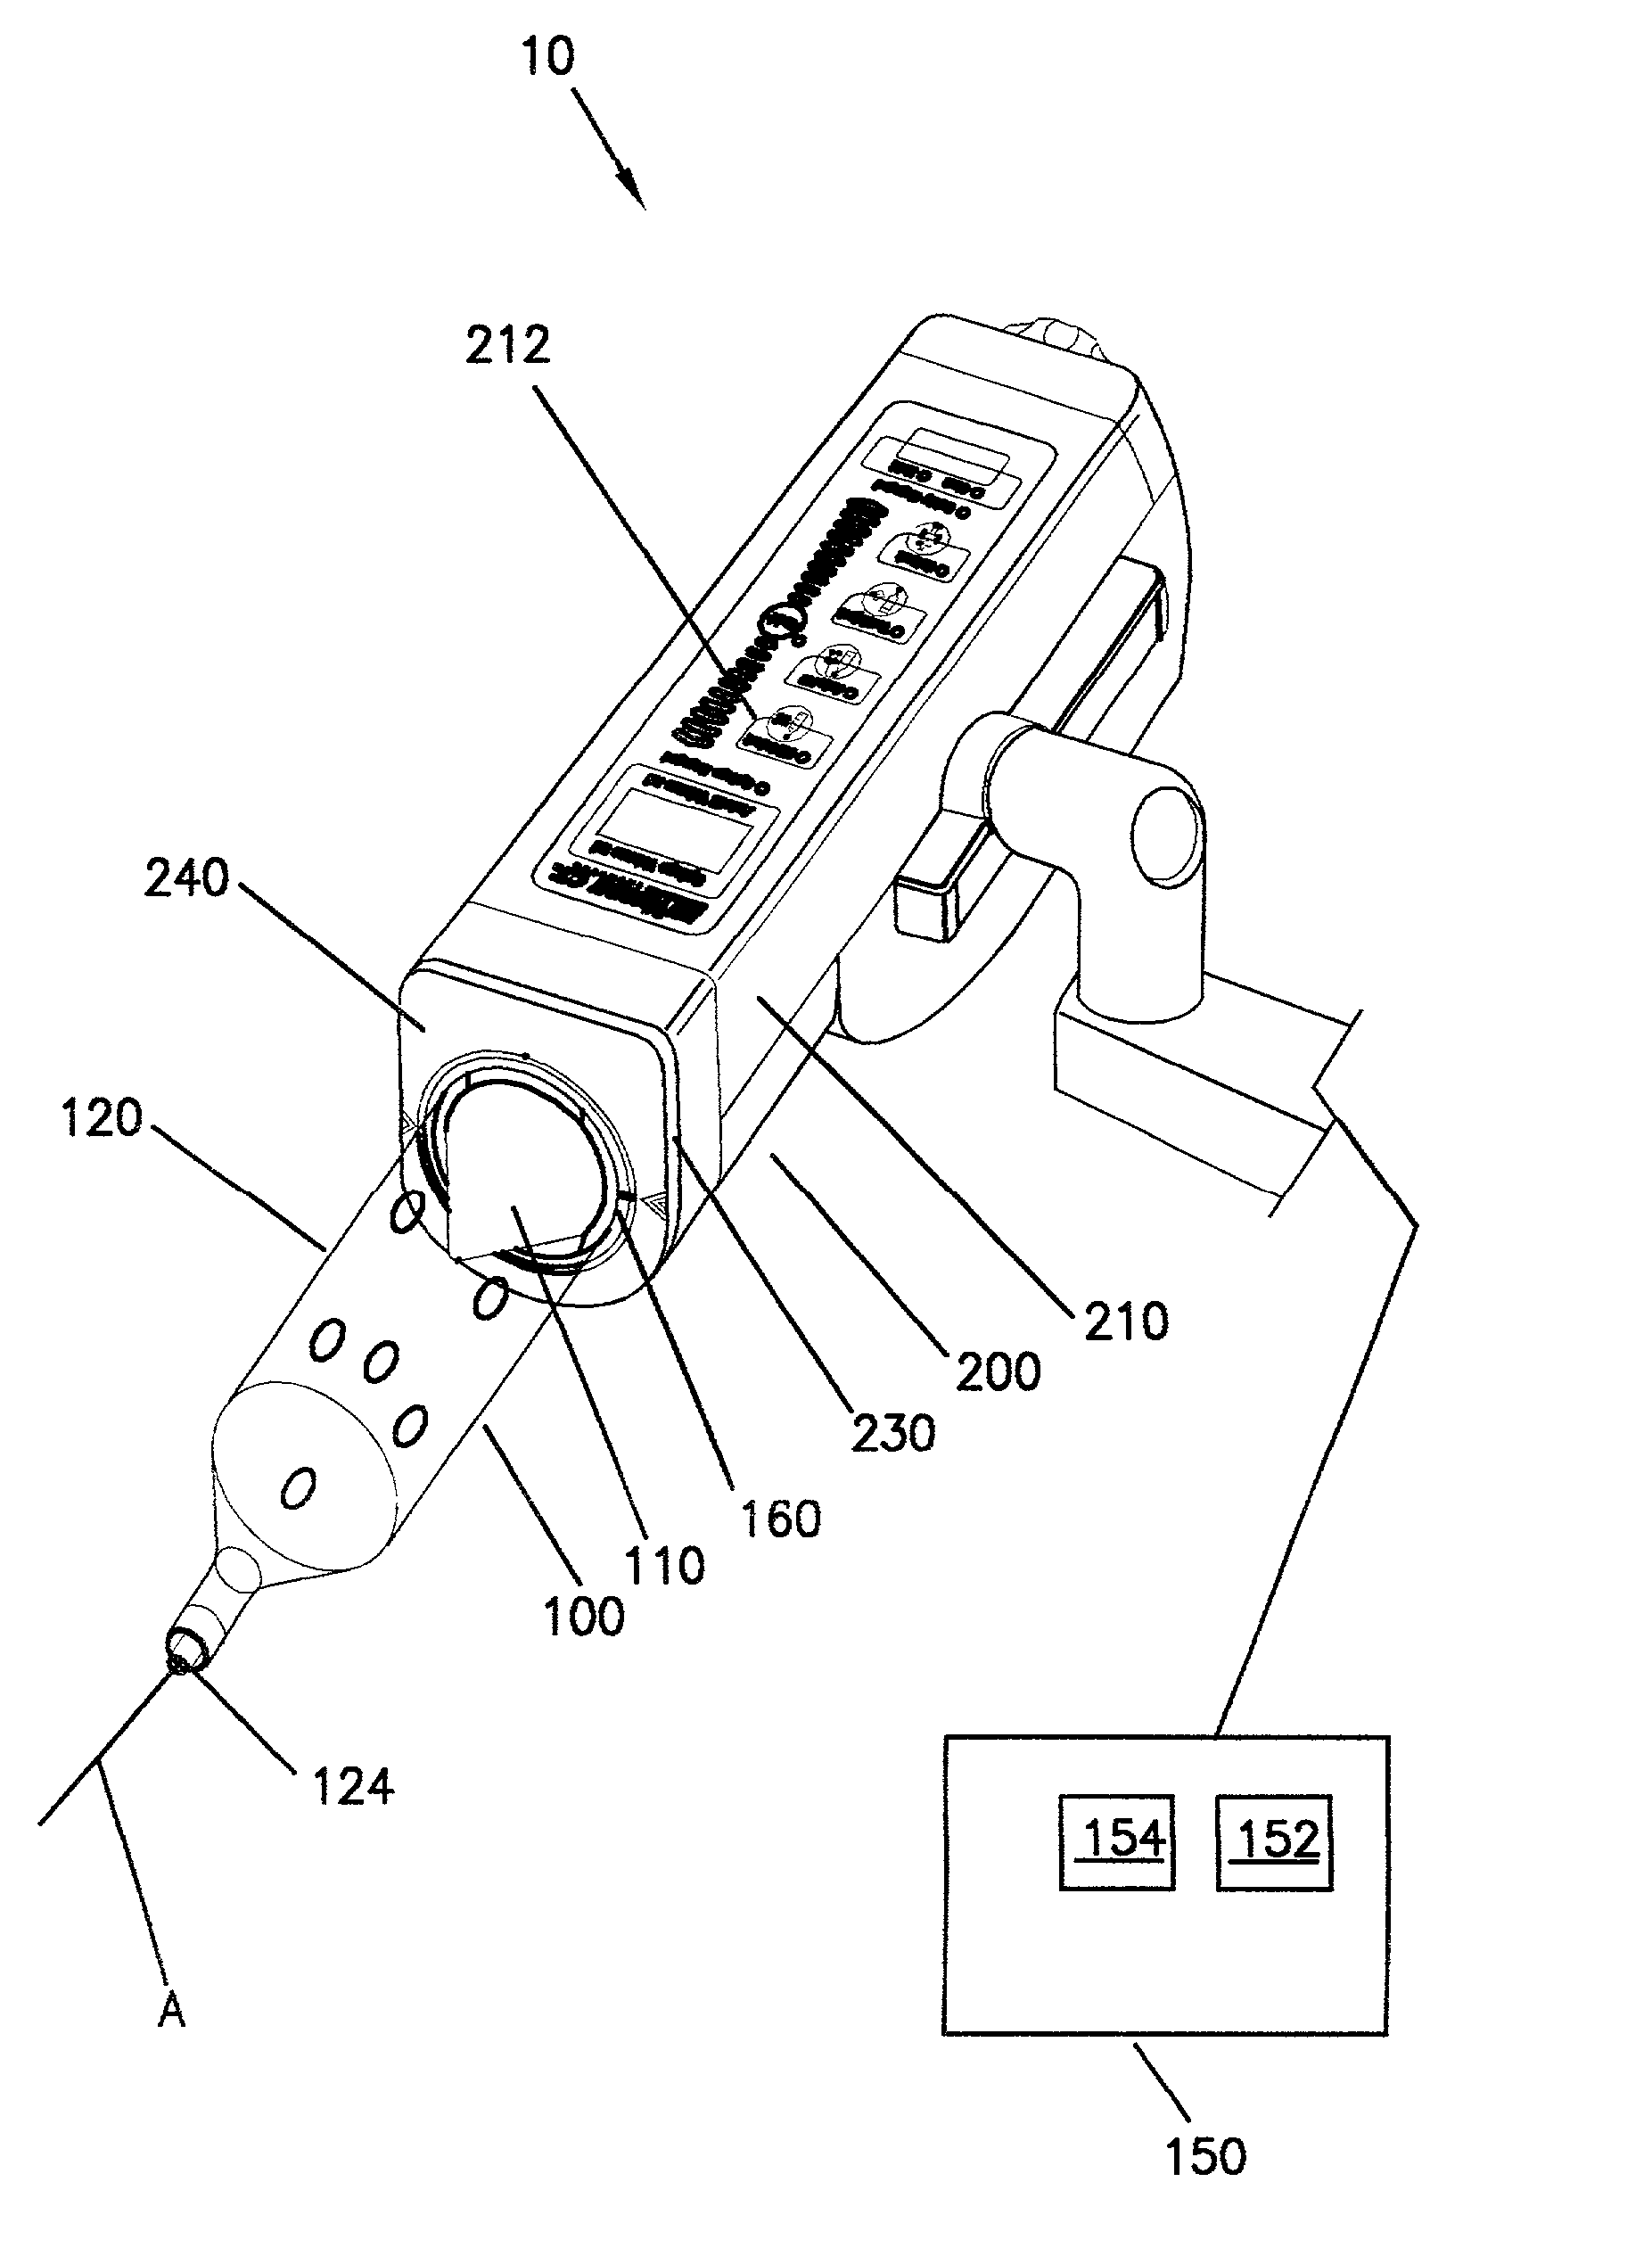 Injector system including a powered loading device for connecting a syringe to an injector